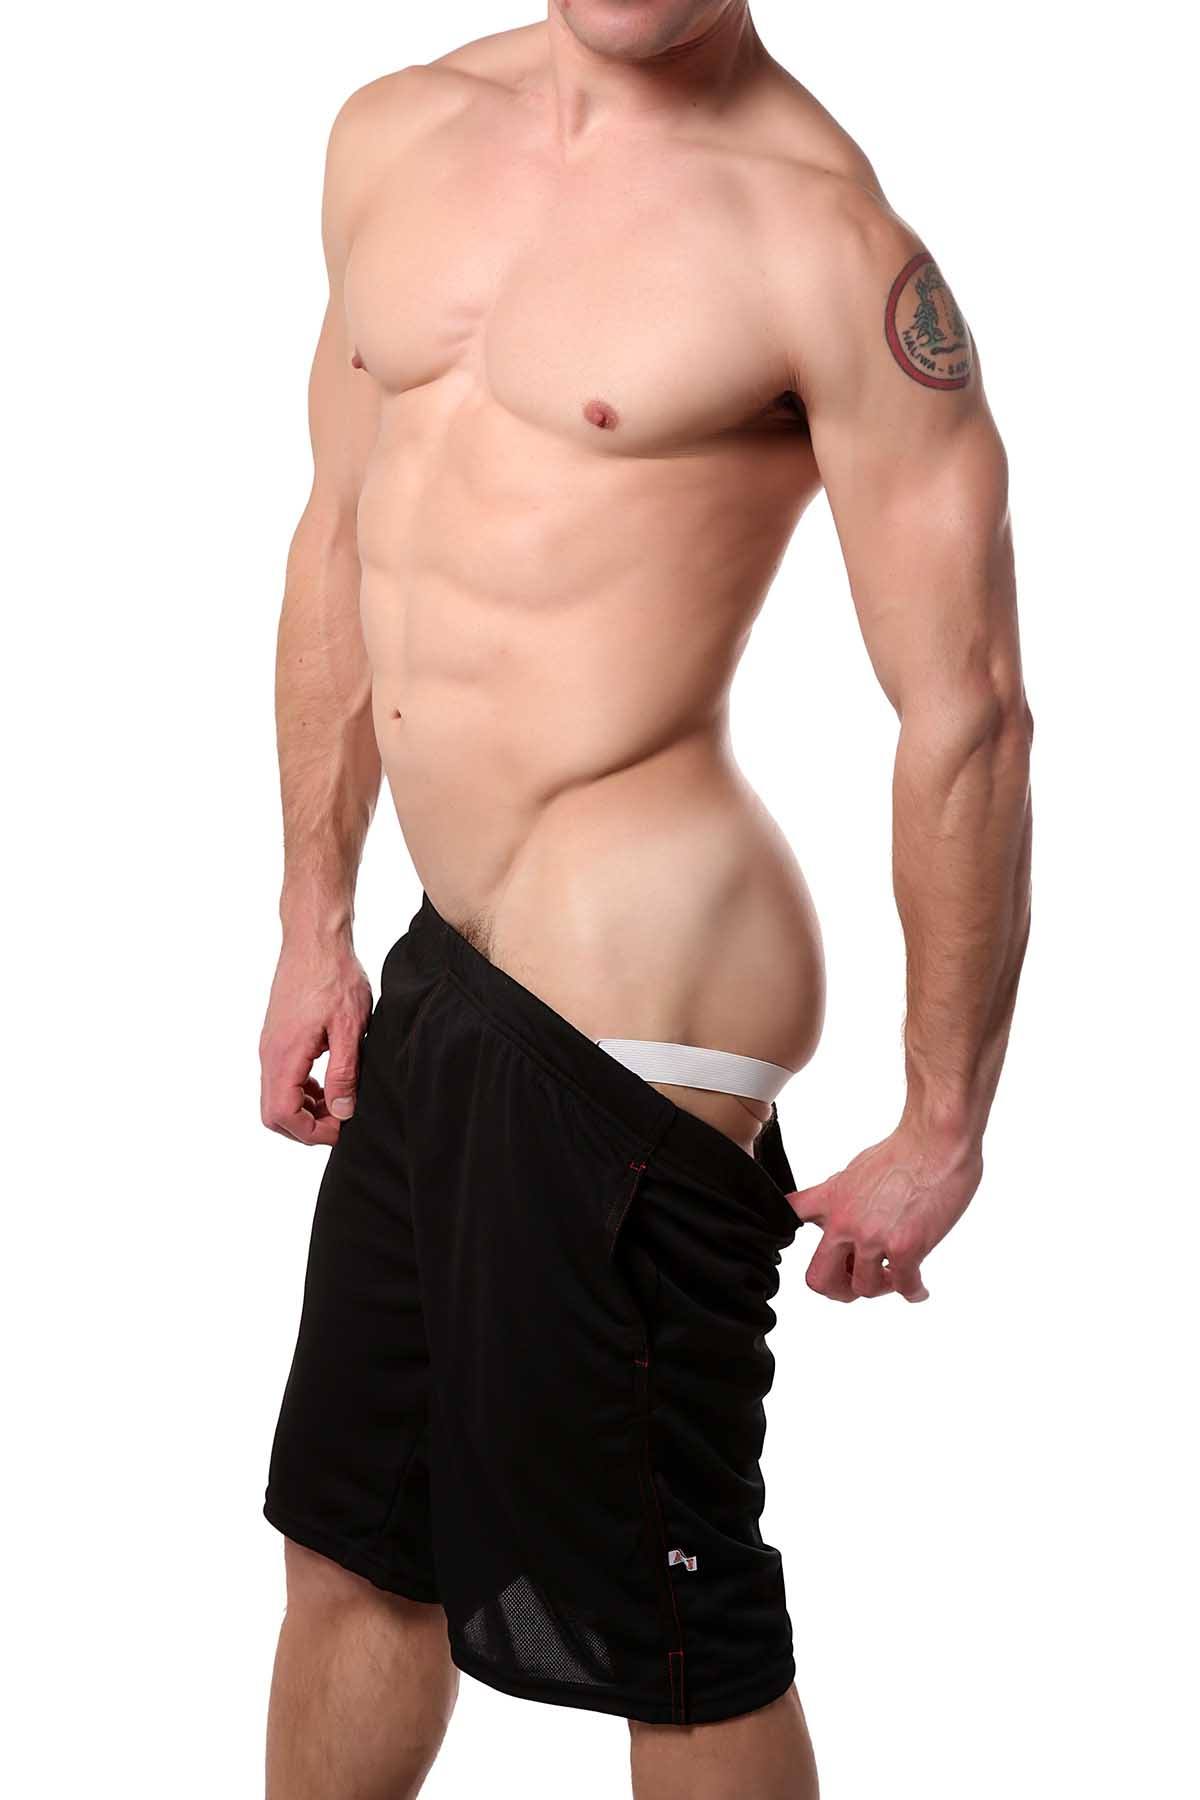 30 Minute Good American Workout Underwear for Fat Body